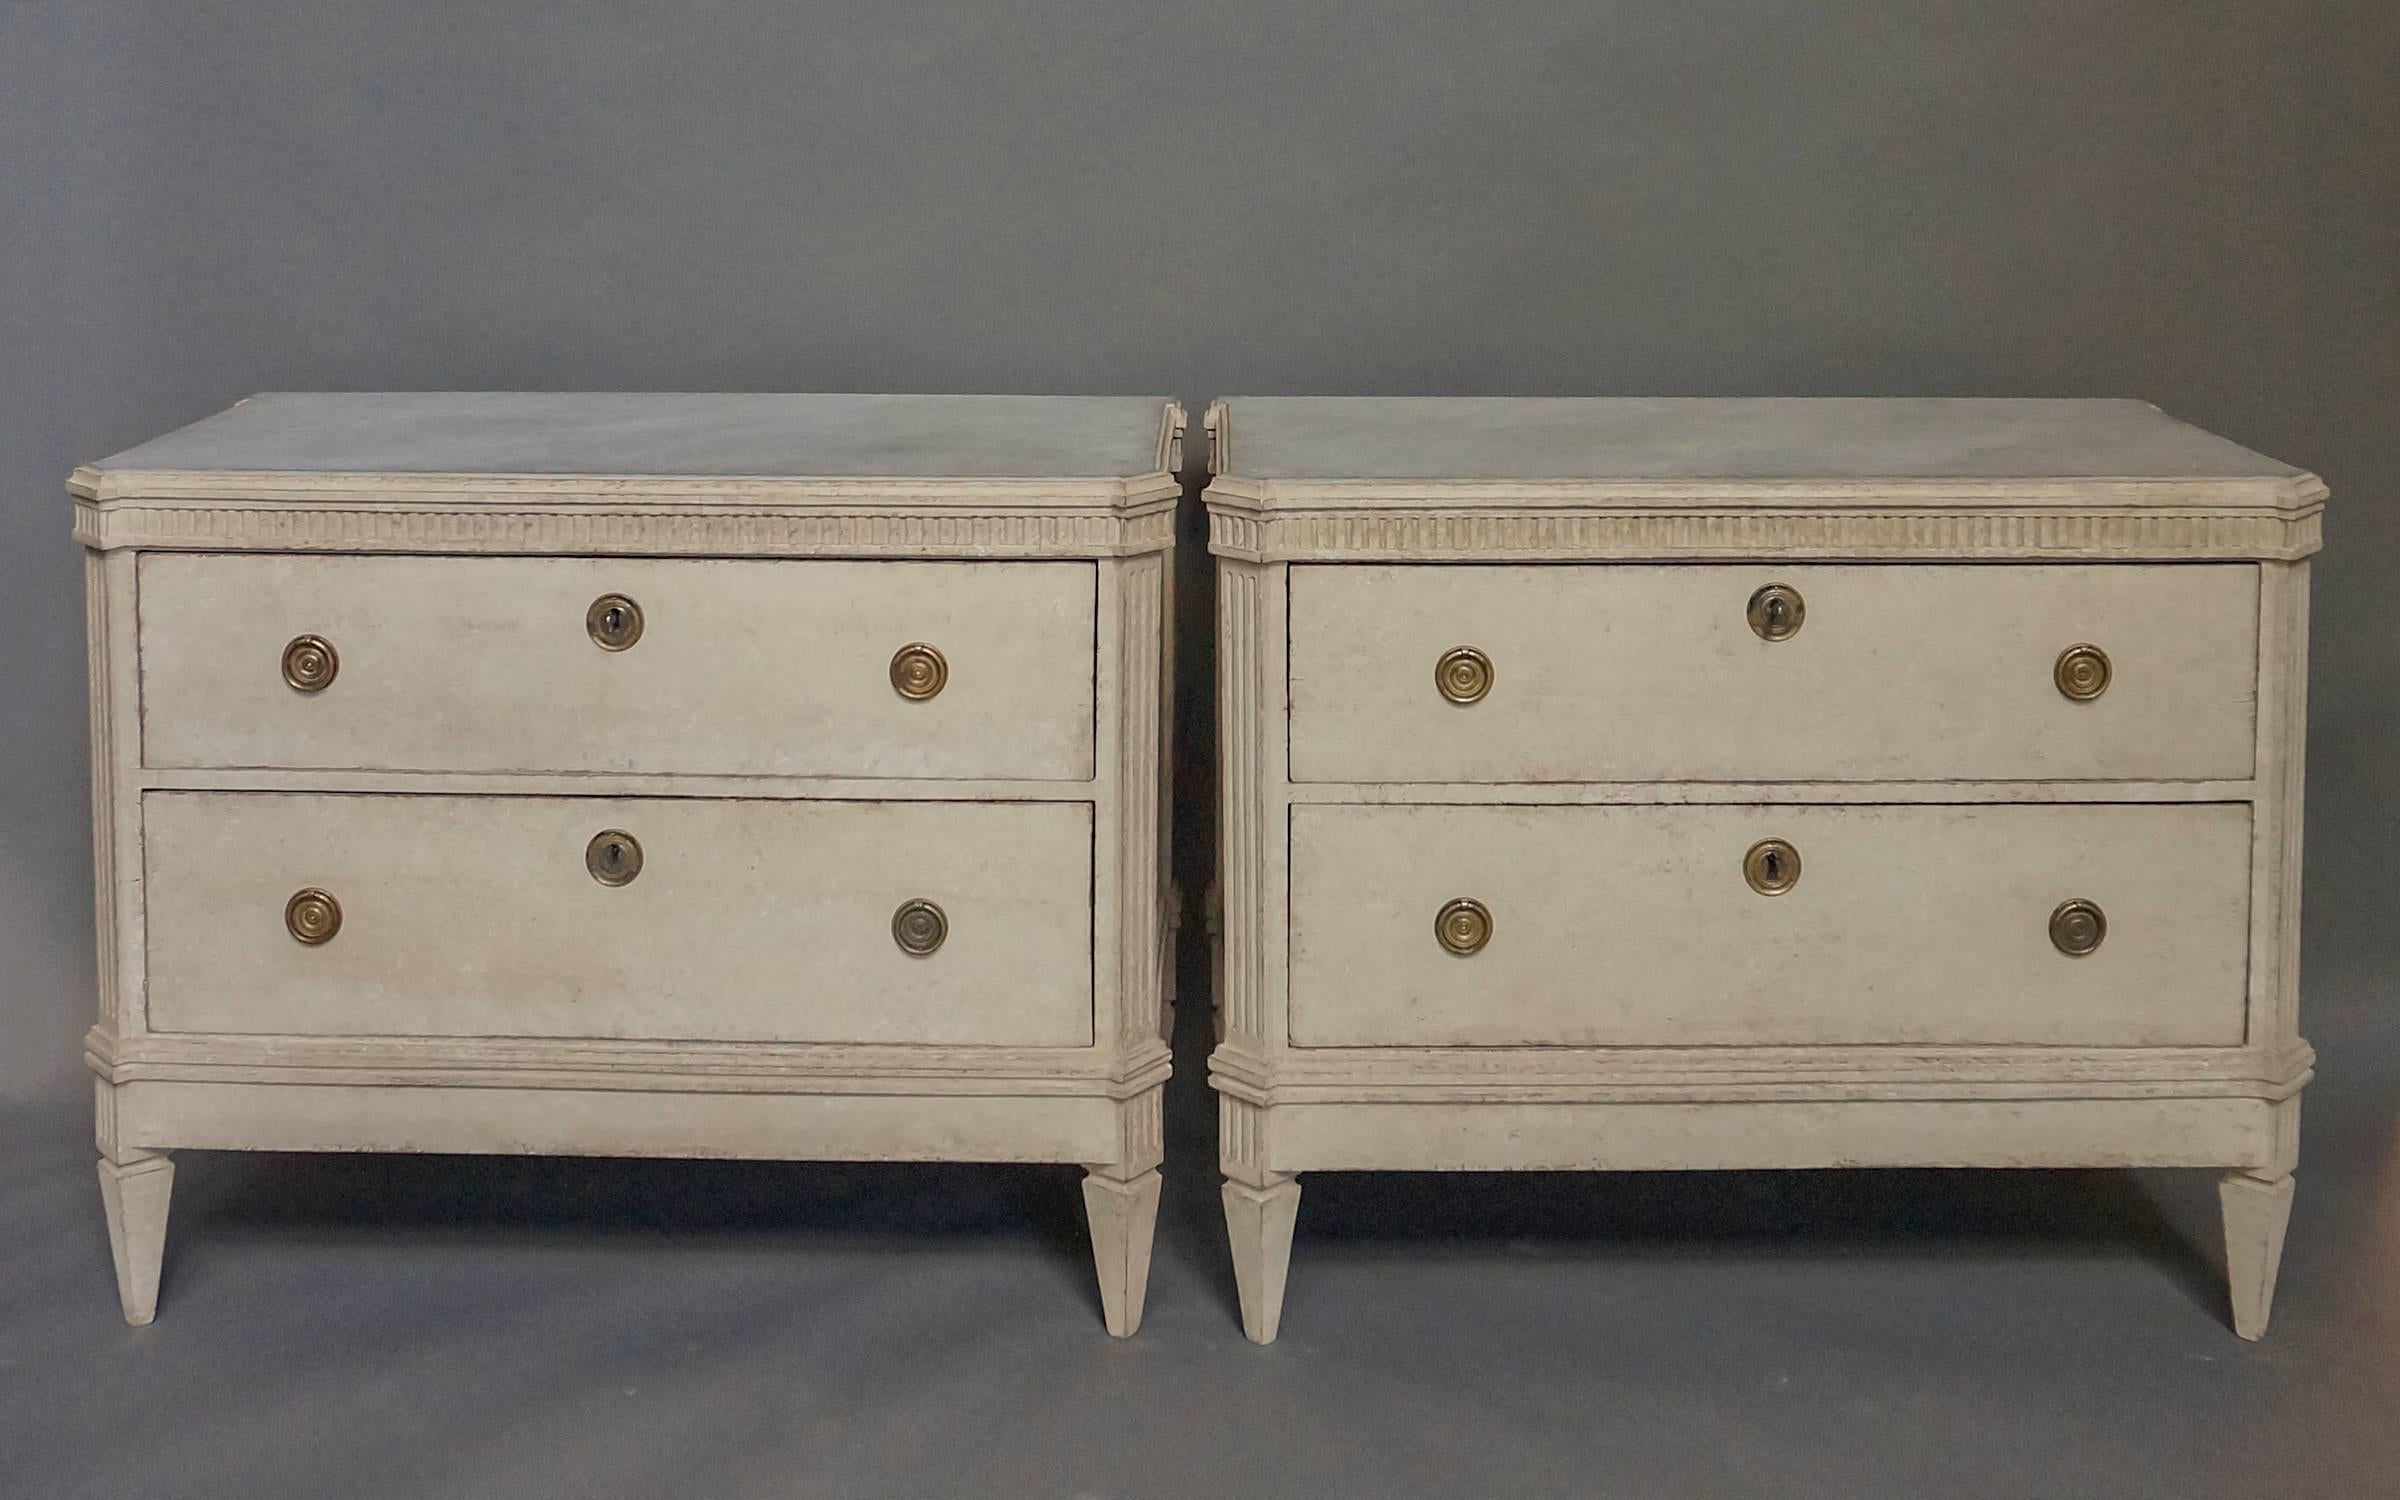 Pair of Swedish commodes, circa 1860 with faux marble tops. Dentil molding runs around the front and sides above the canted corners with reeded corner posts and the two deep drawers. Tapering square legs.